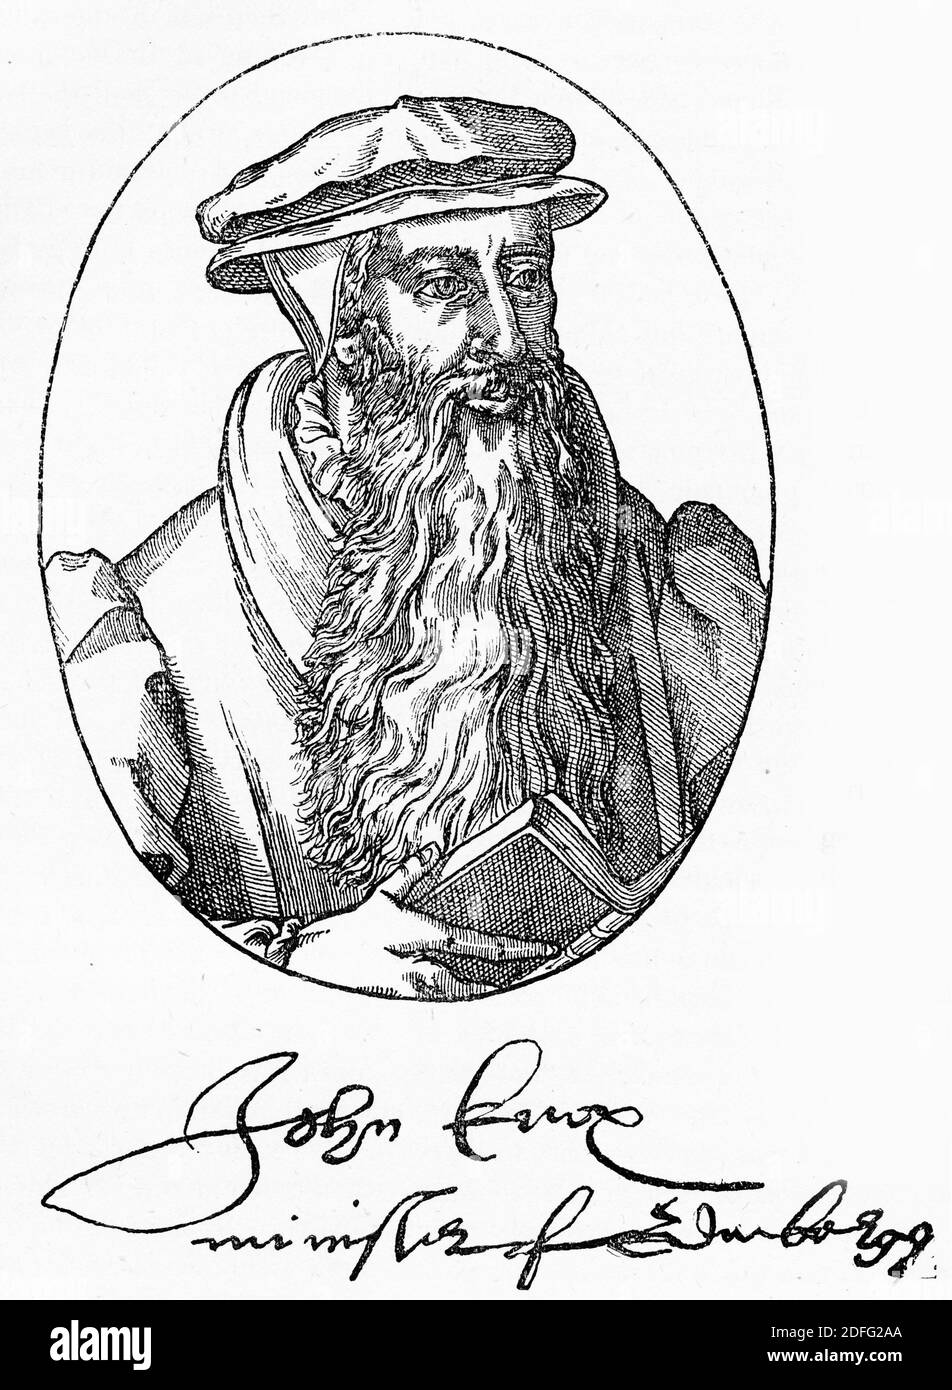 Engraving of Scottish reformer John Knox and signature. Illustration from 'The history of Protestantism' by James Aitken Wylie (1808-1890), pub. 1878 Stock Photo